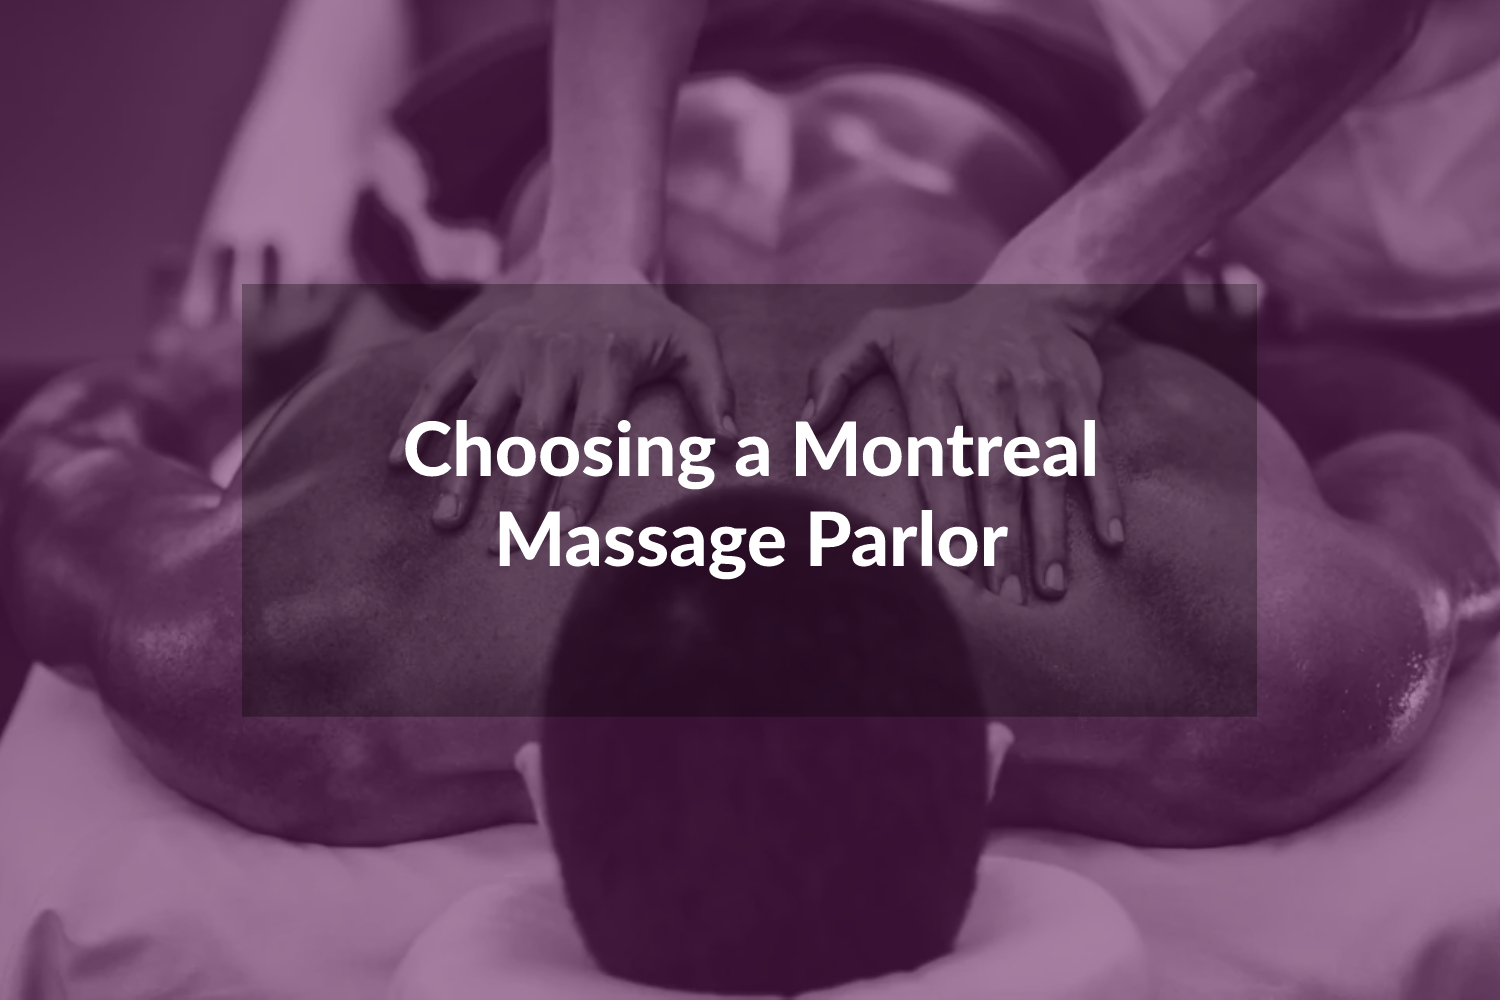 A Montreal Massage Parlor